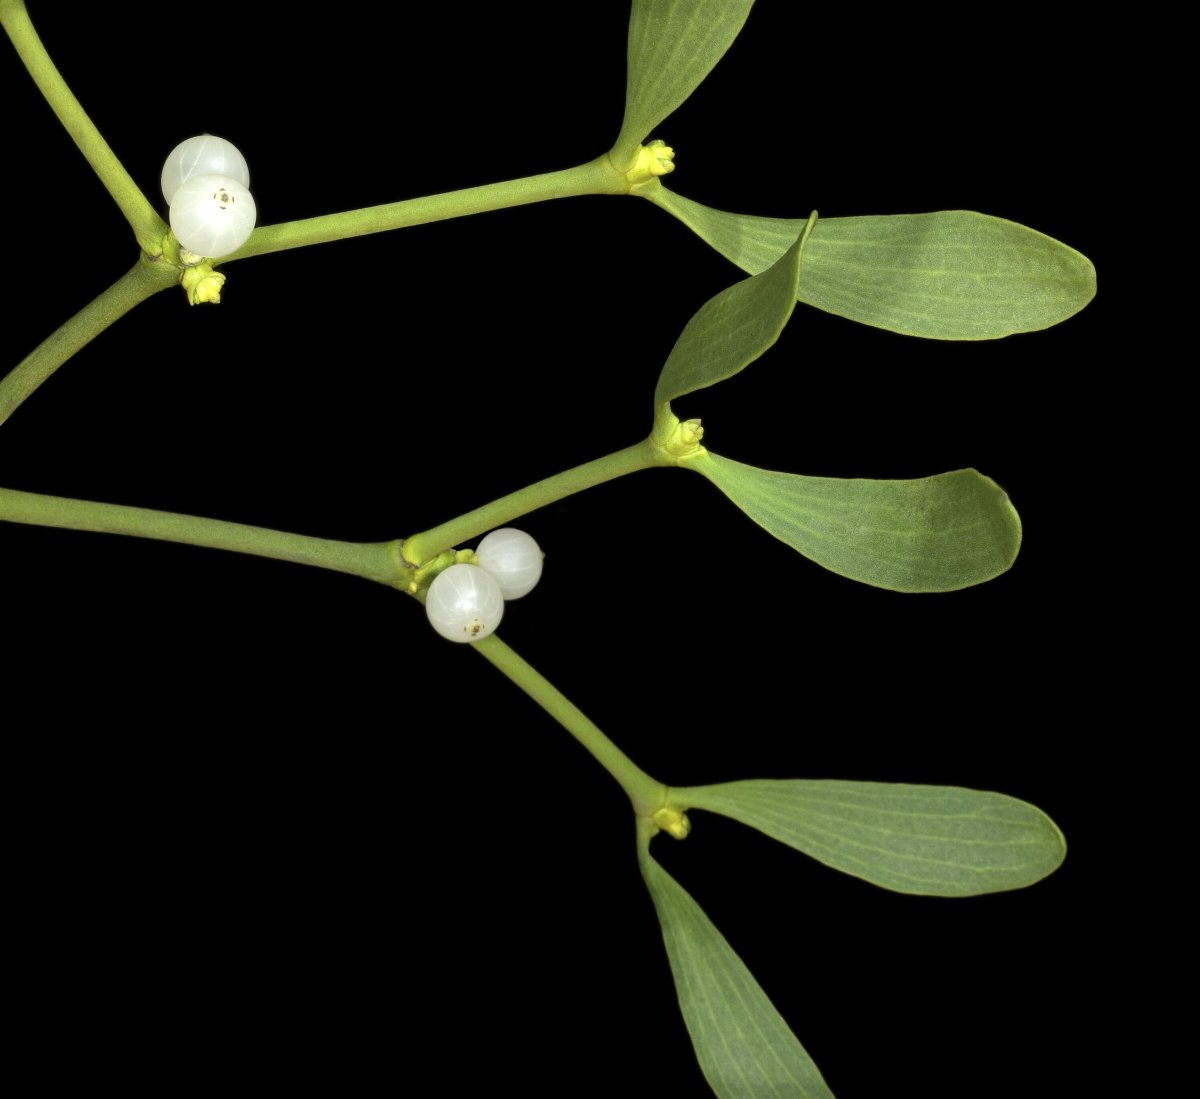 The @darwintreelife project has hit 1000 genomes on the quest to sequence all eukaryotic life in 🇬🇧 and 🇮🇪! With local professionals and citizen scientists, we've already contributed material for 59 plant and 22 fungal genomes, including the isles' biggest genome: mistletoe!